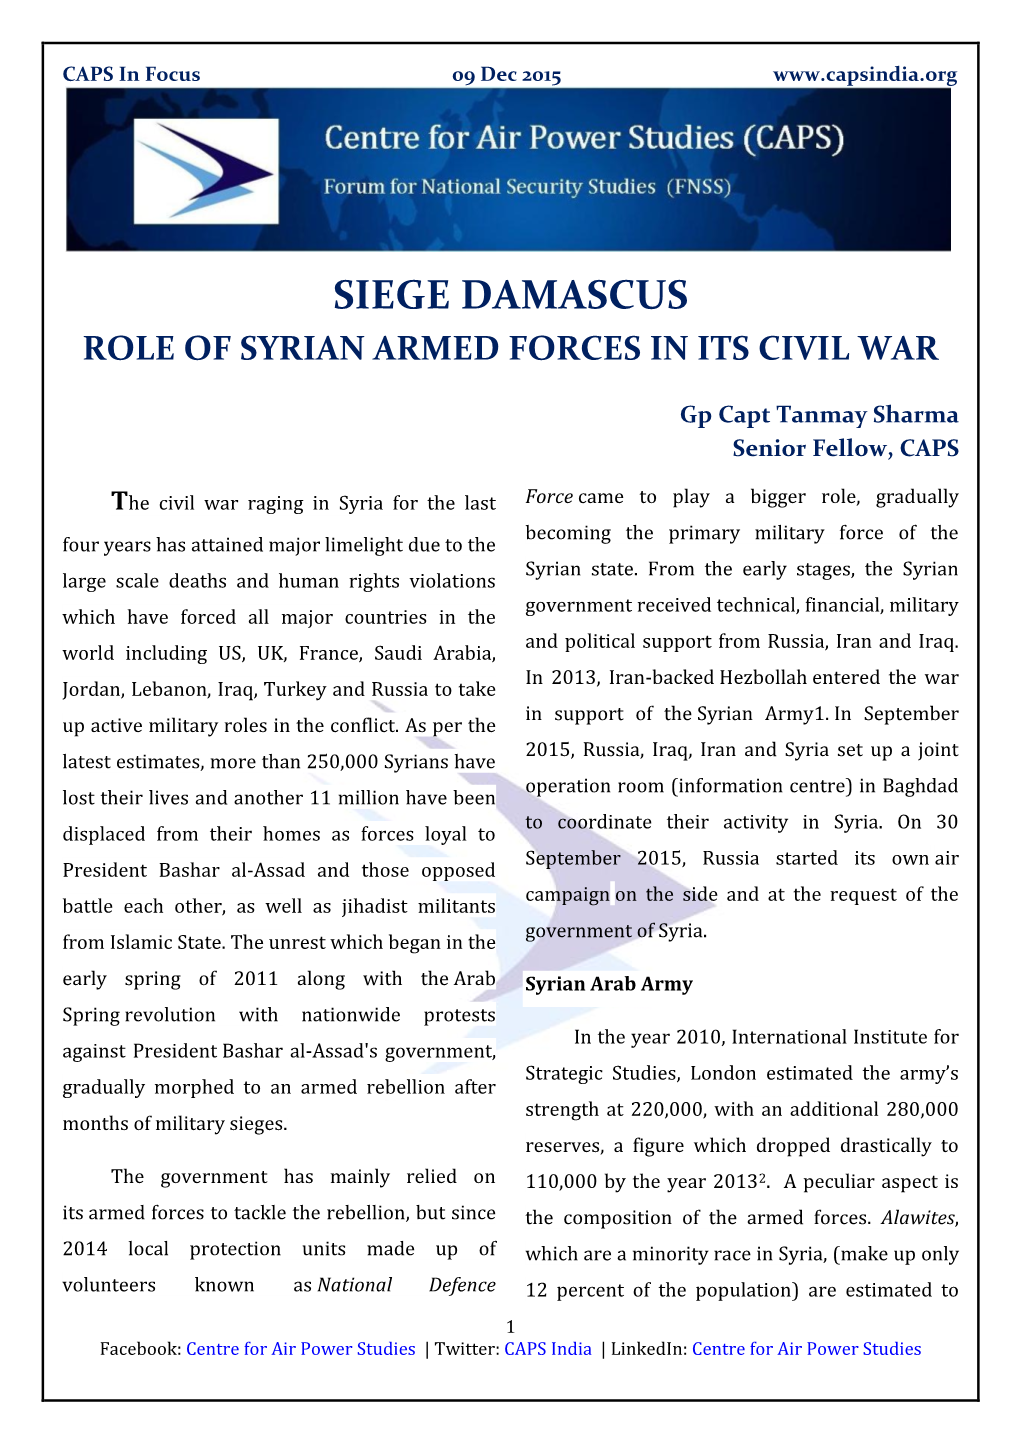 Siege Damascus: Role of Syrian Armed Forces in Its Civil